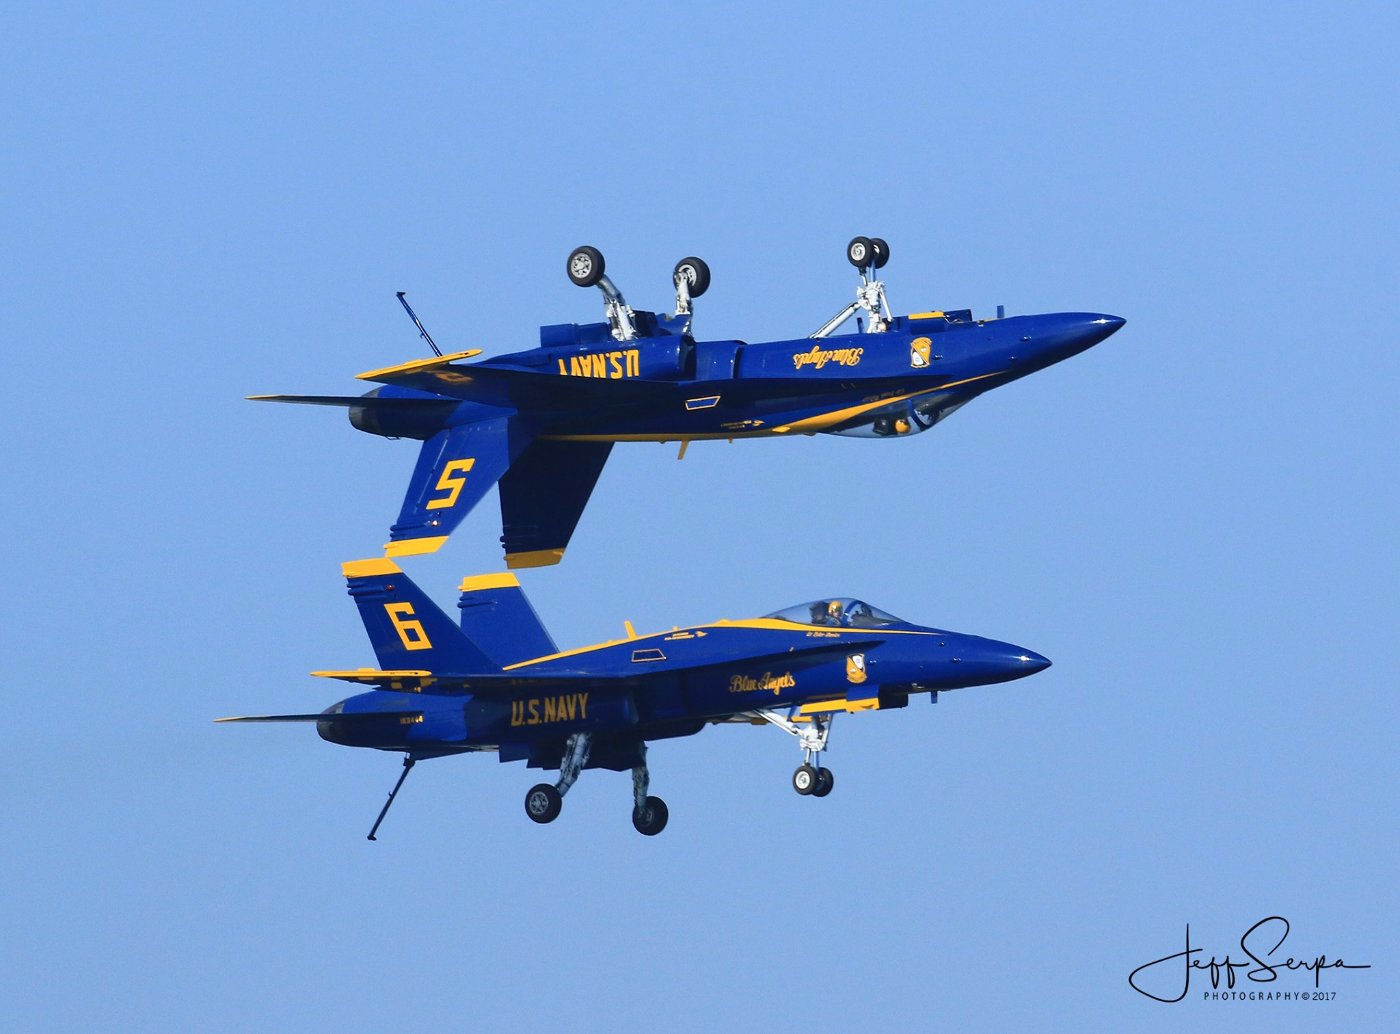 Lead Solo Blue Angel #5 Commander Frank Weisser and Opposing solo Blue Angel #6 Lieutenant Tyler Davies setting up for The Fortis